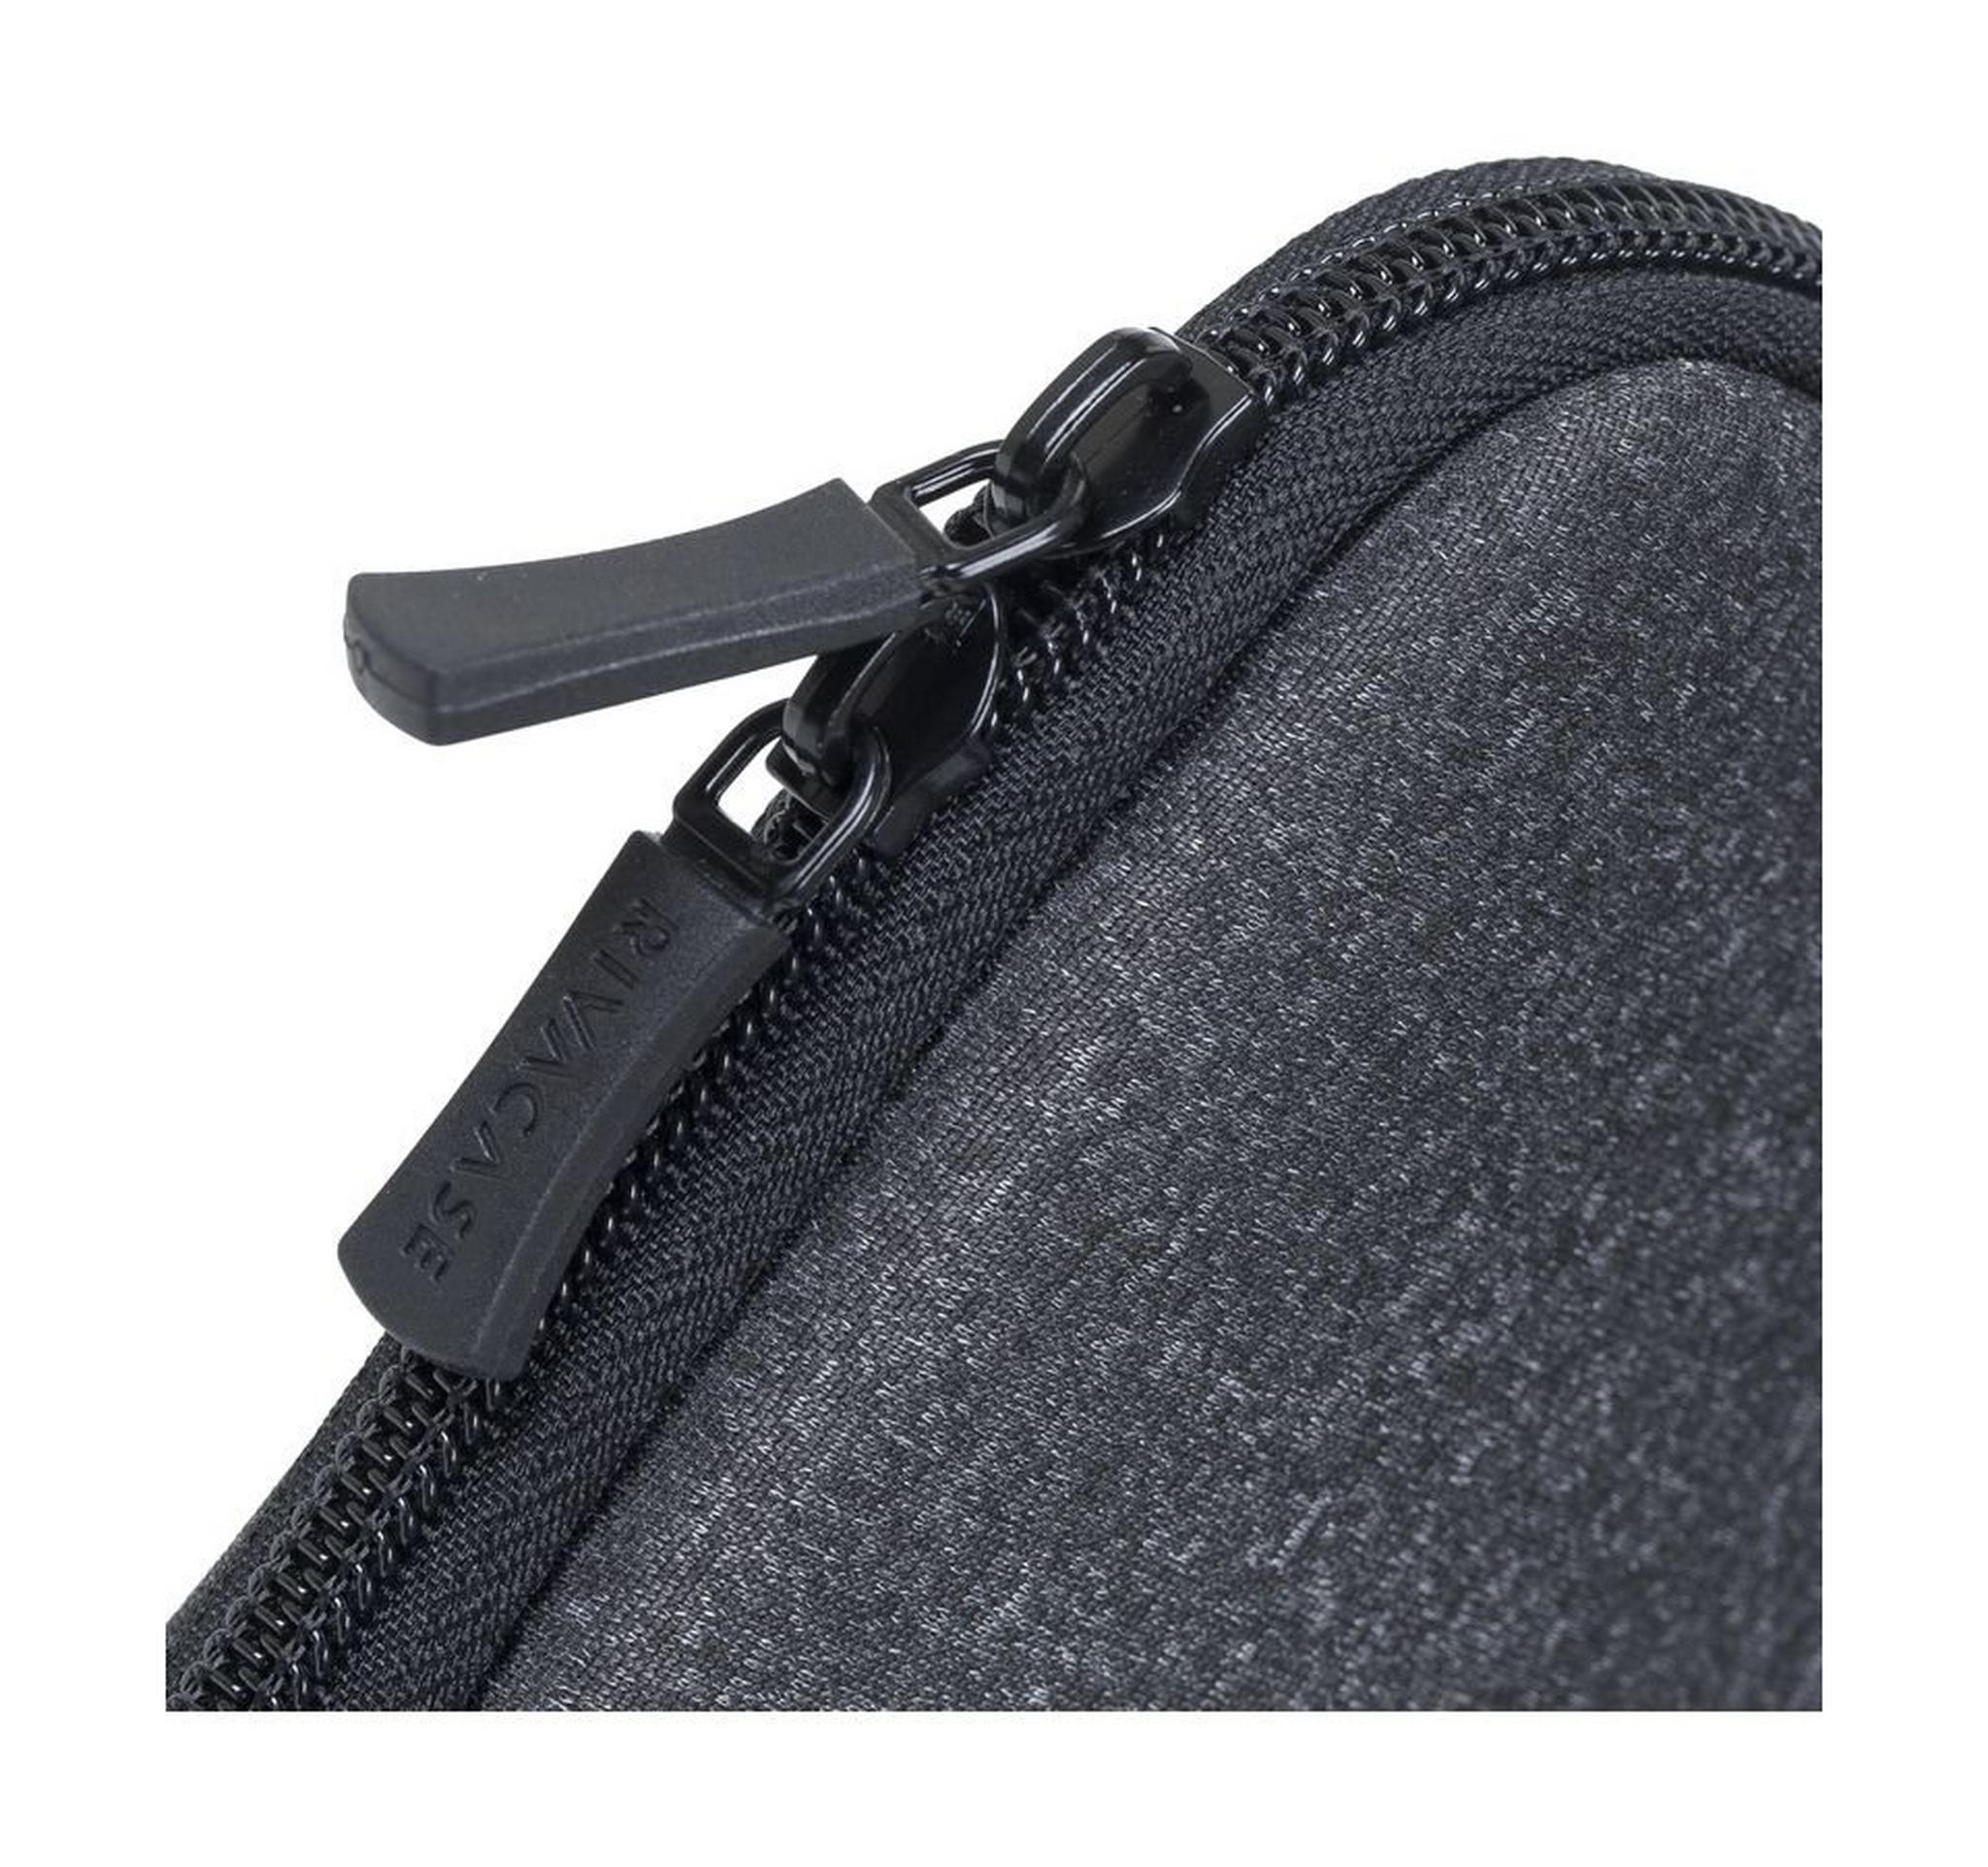 Riva Laptop Sleeve for Laptop up to 15.4 inch - Dark Grey